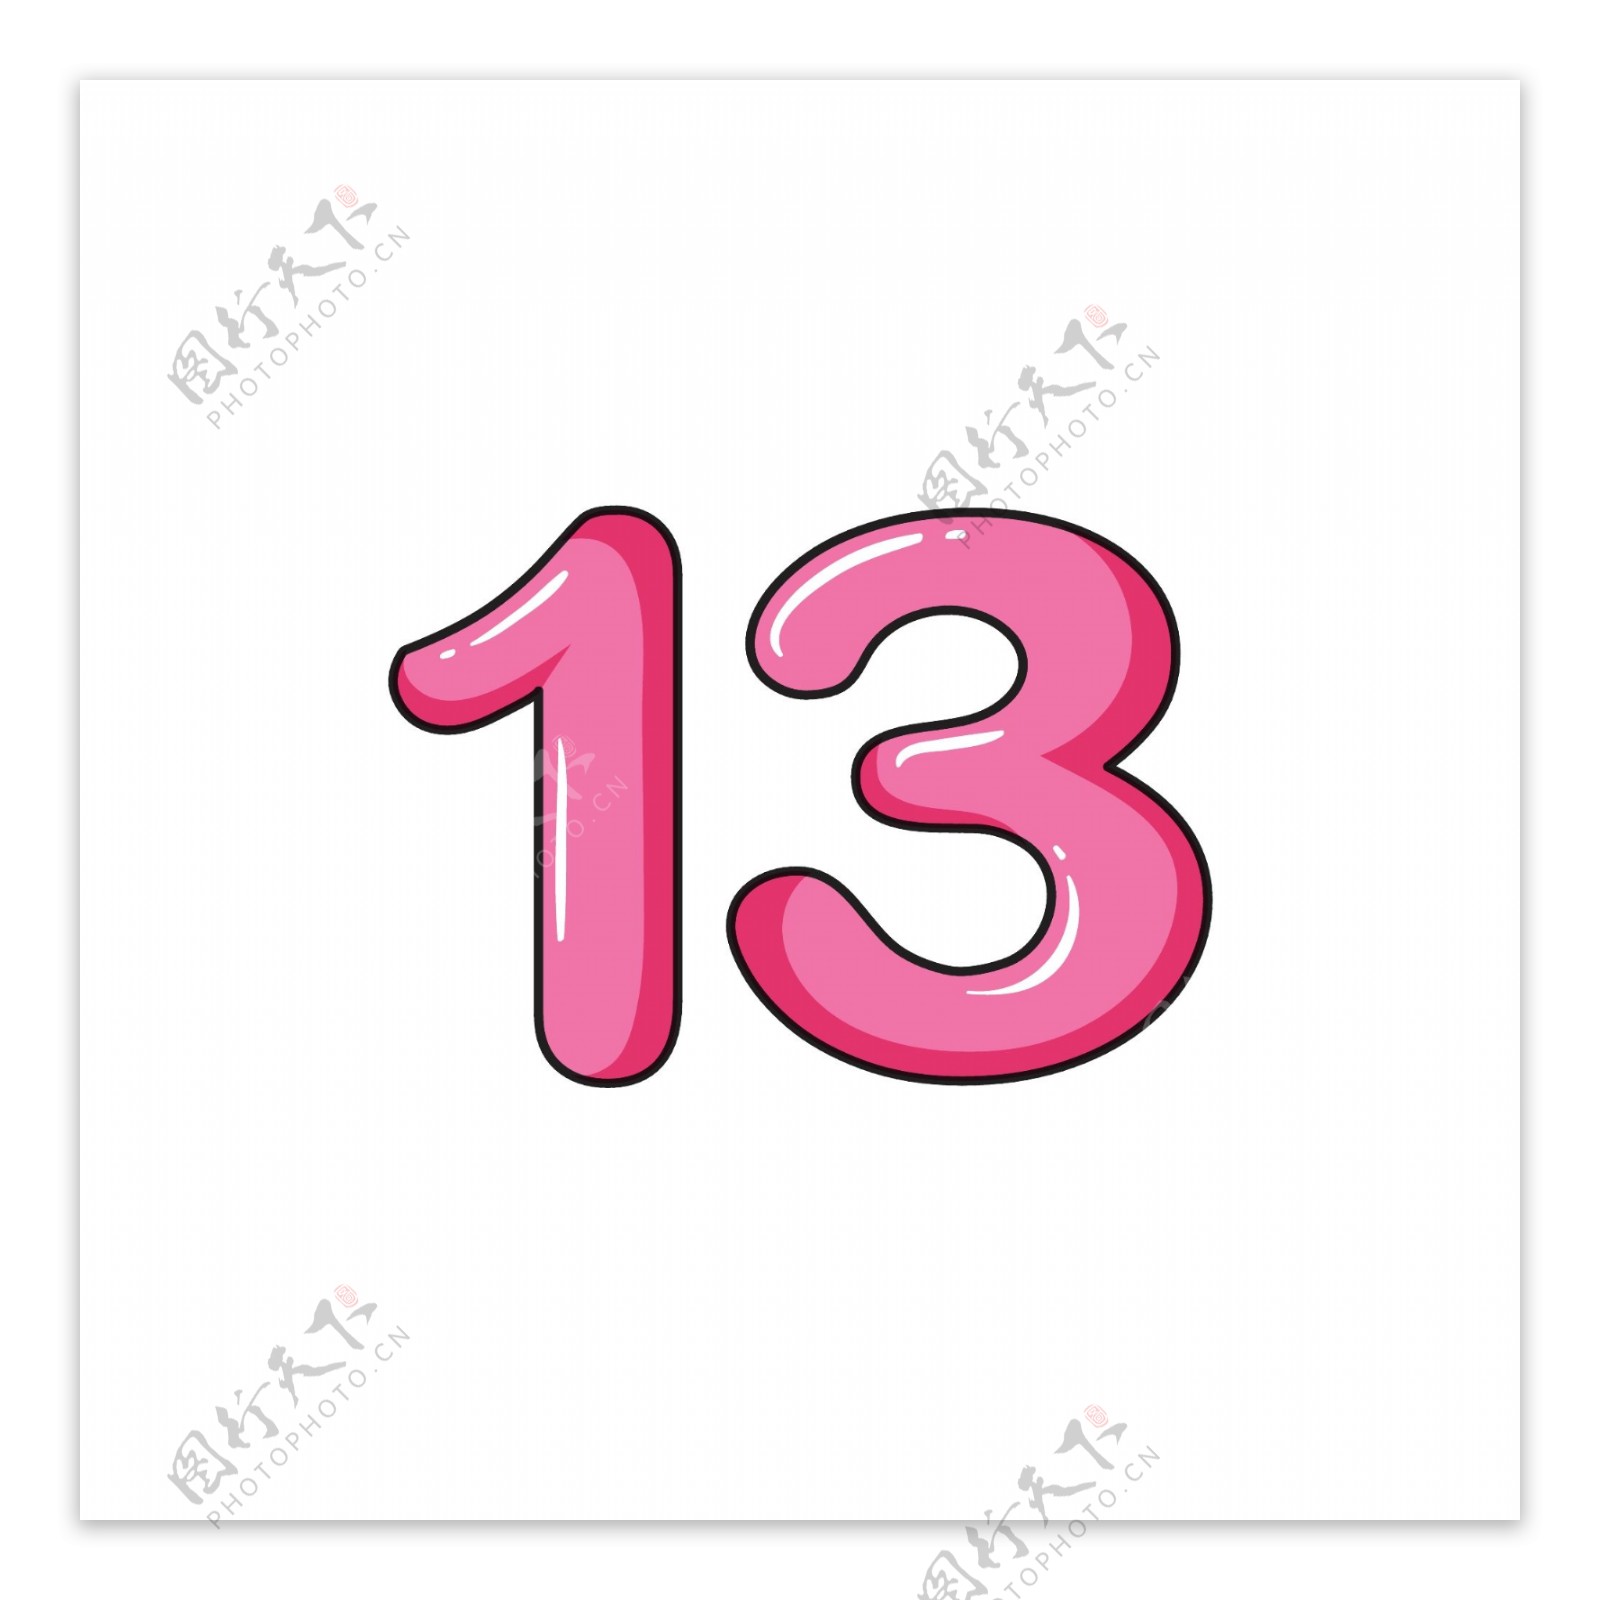 Number 13 on a road sign thirteen image - Free stock photo - Public Domain photo - CC0 Images